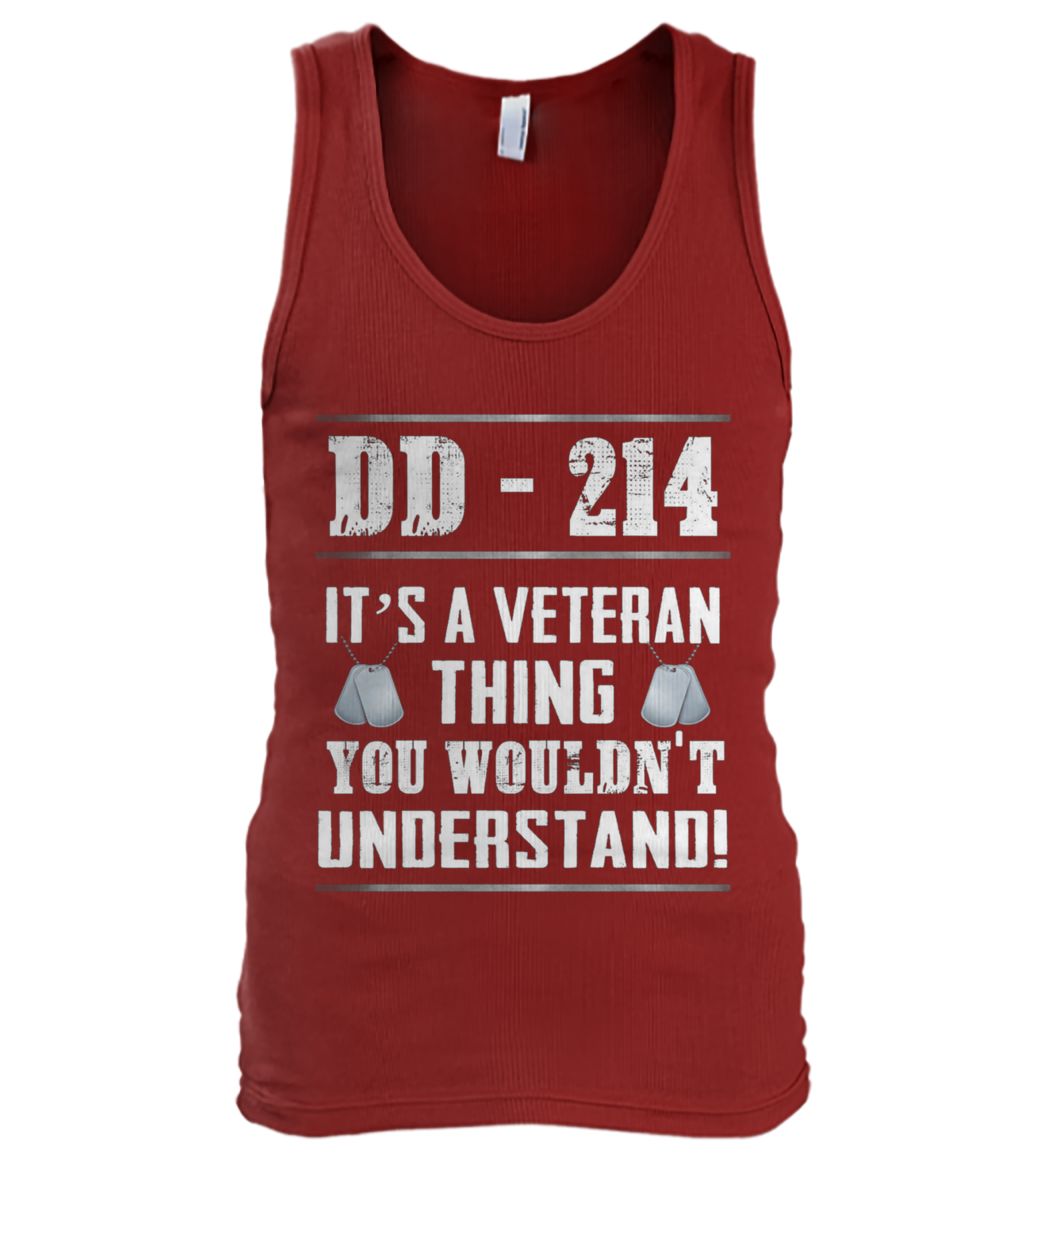 DD-214 it's a veteran thing you wouldn't understand men's tank top